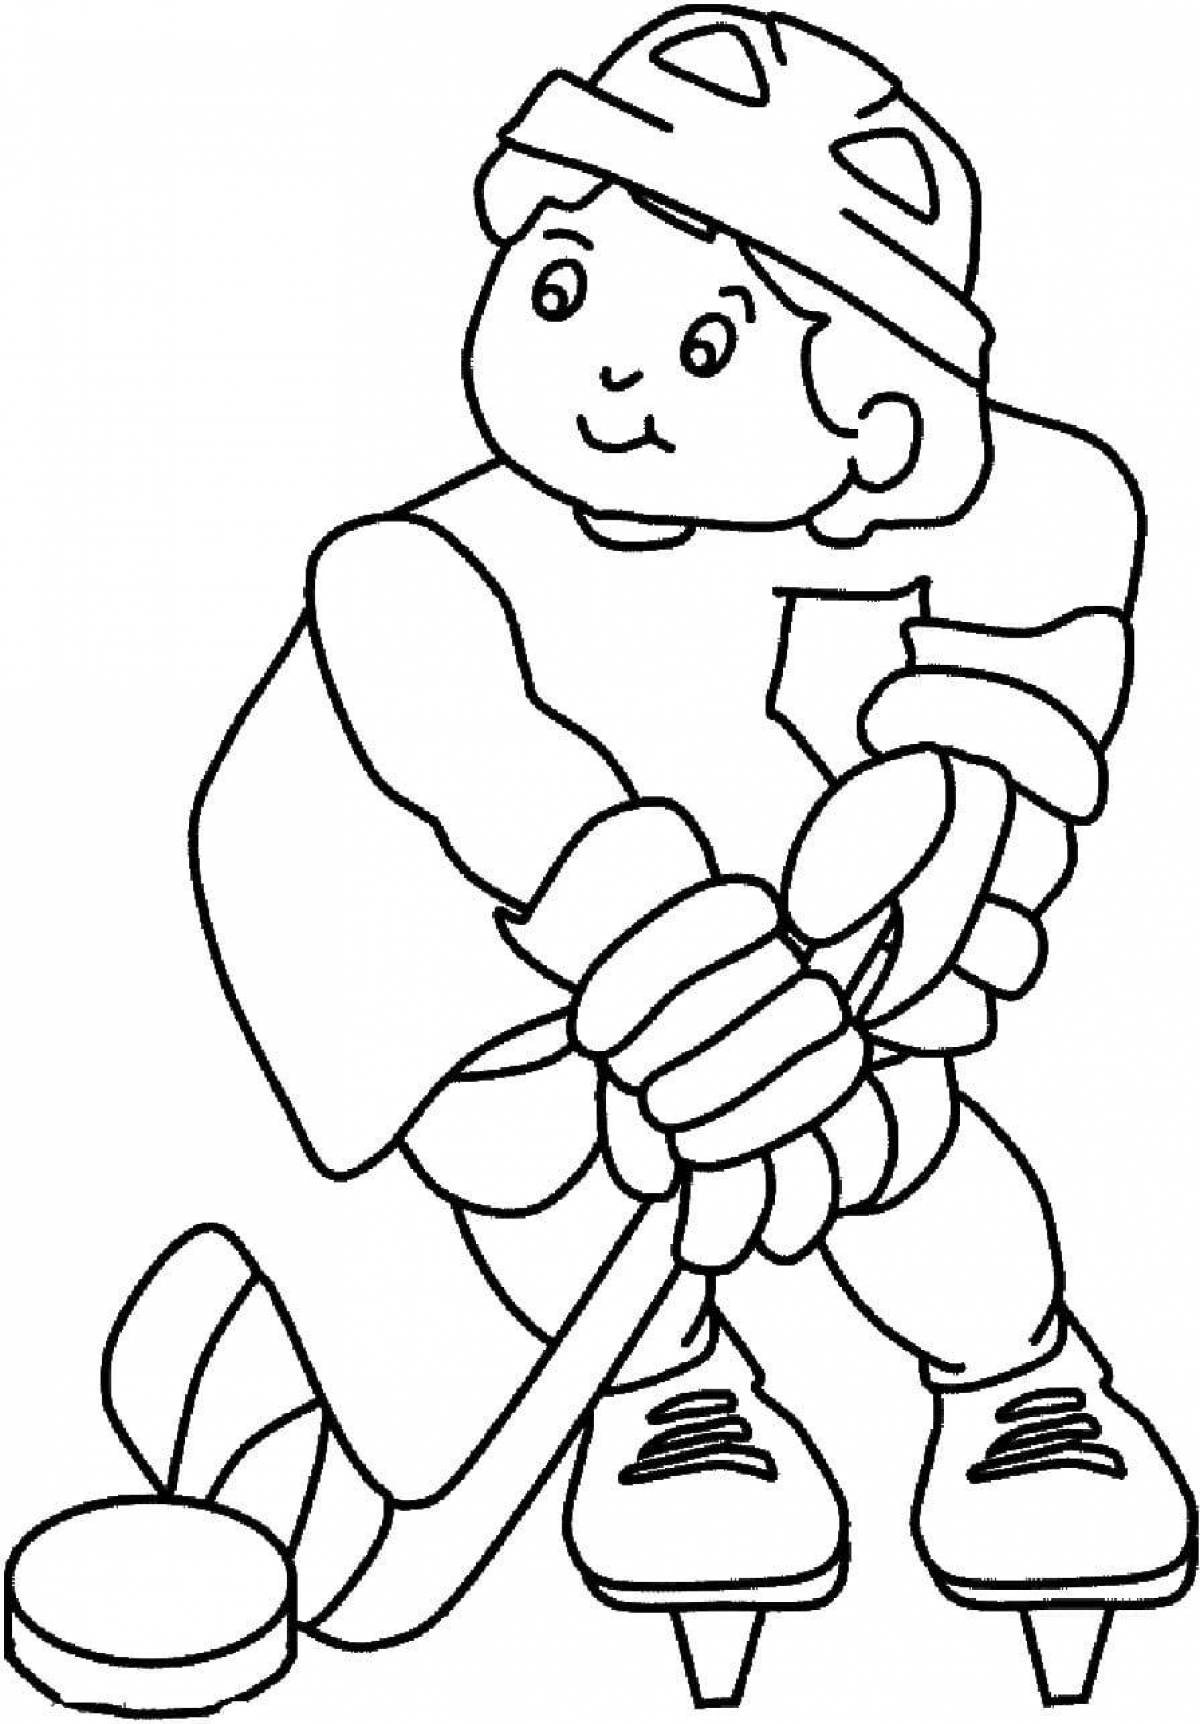 Shiny winter sports coloring book for 6-7 year olds